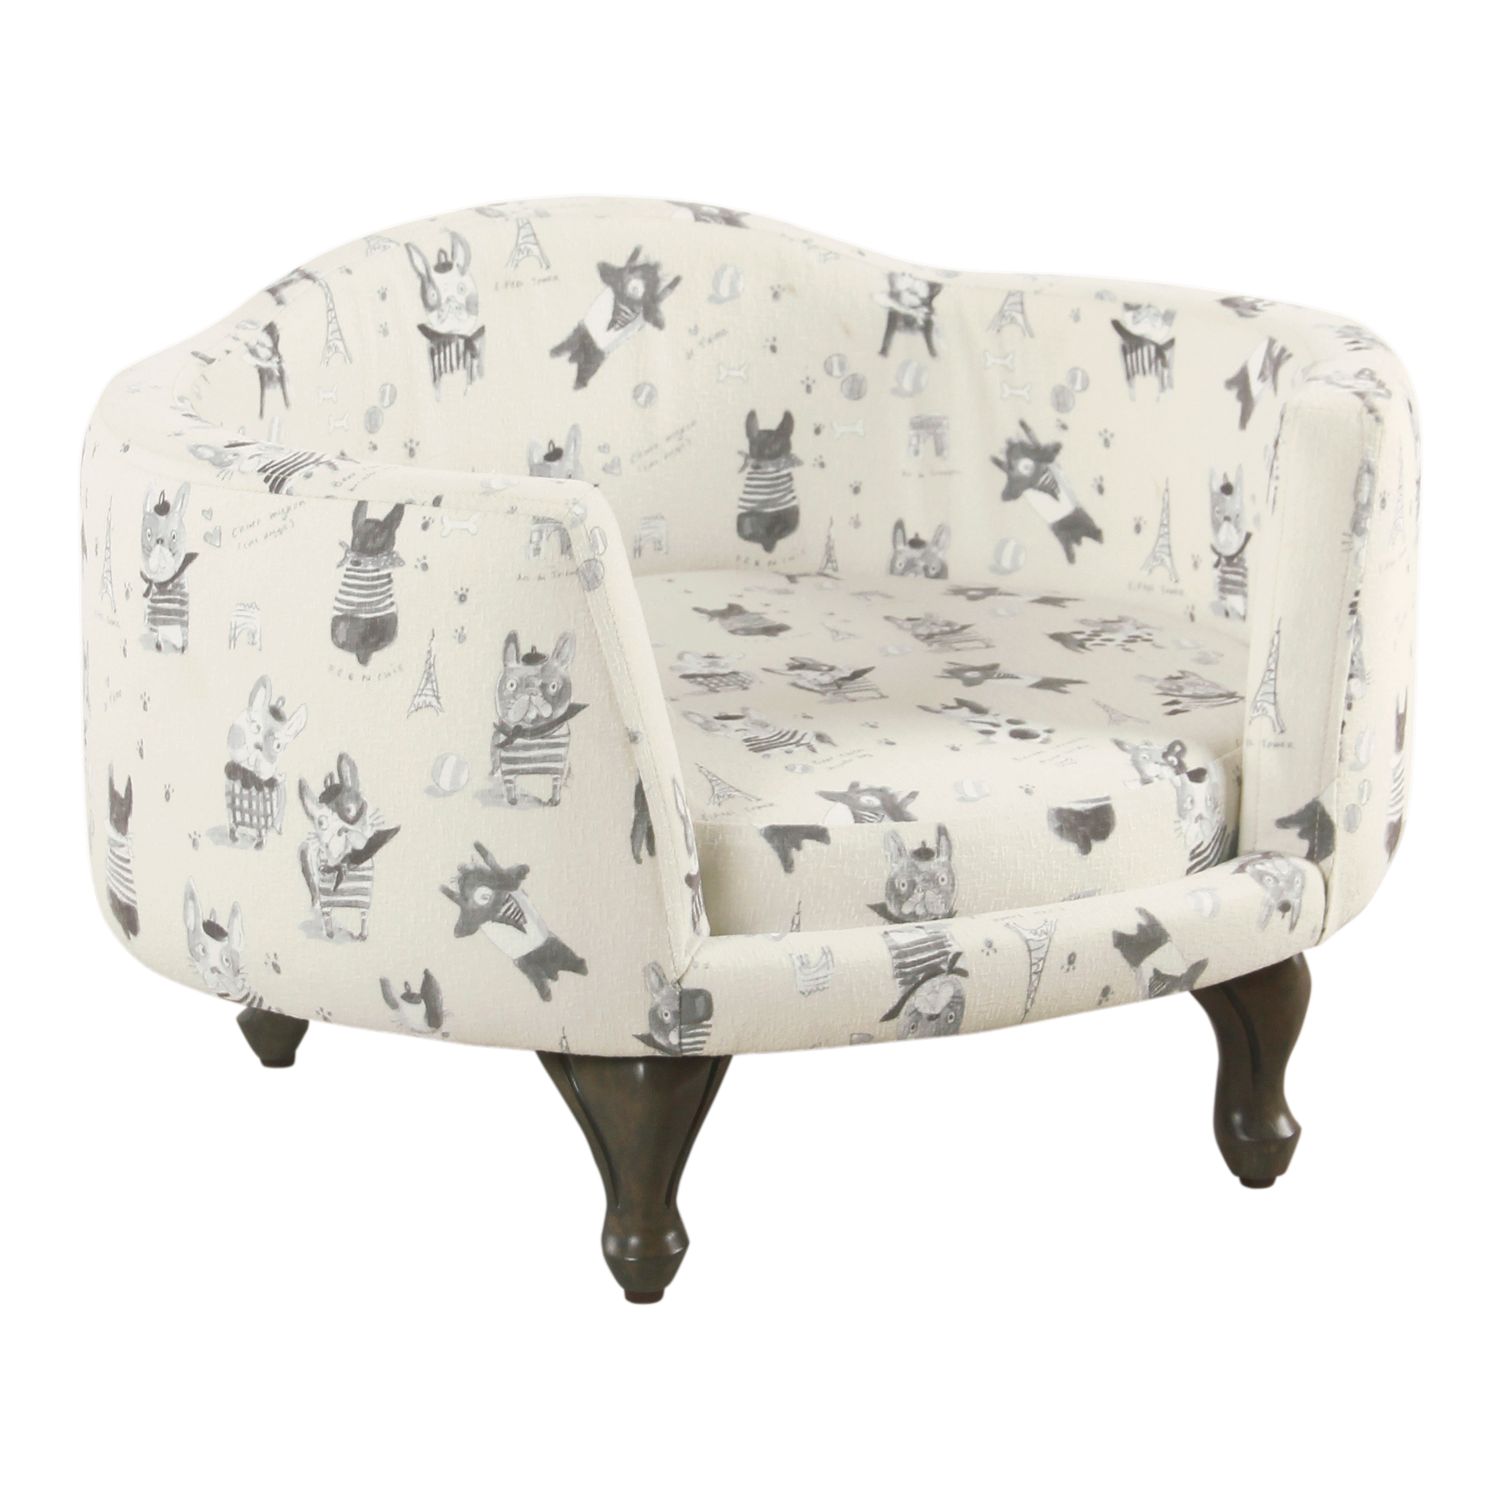 Image for HomePop Pet Bed - French Bulldog Print at Kohl's.